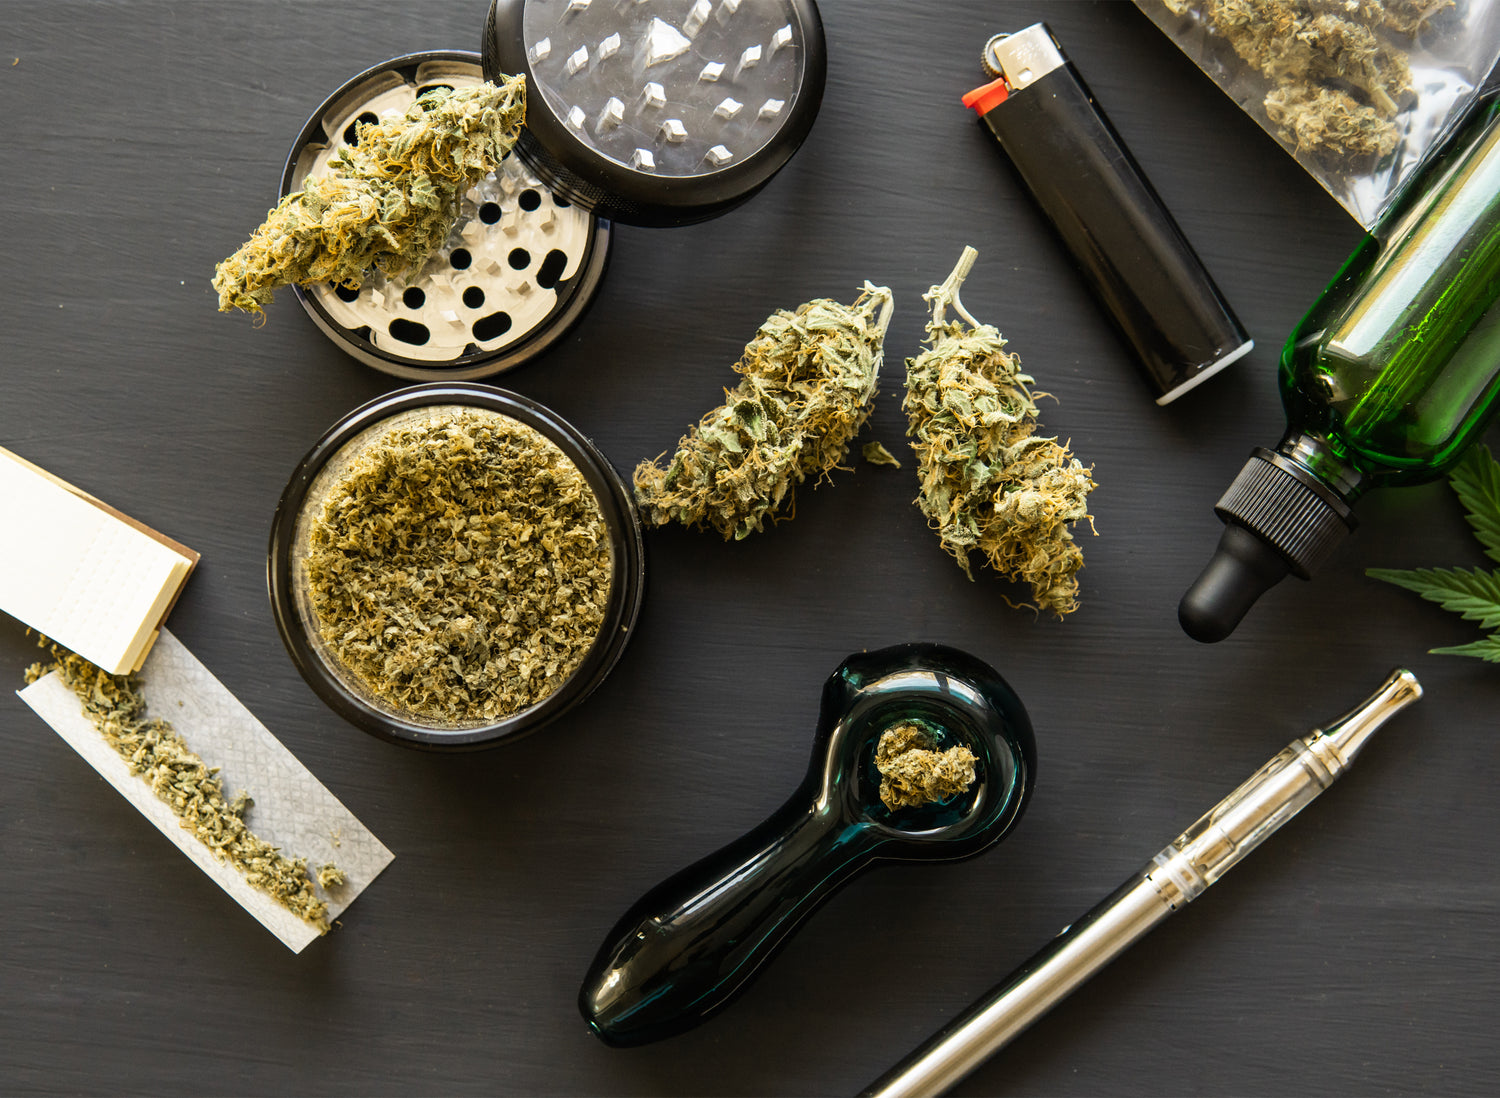 Marijuana vessels: Joints, pipes, bongs, bats and other ways to smoke